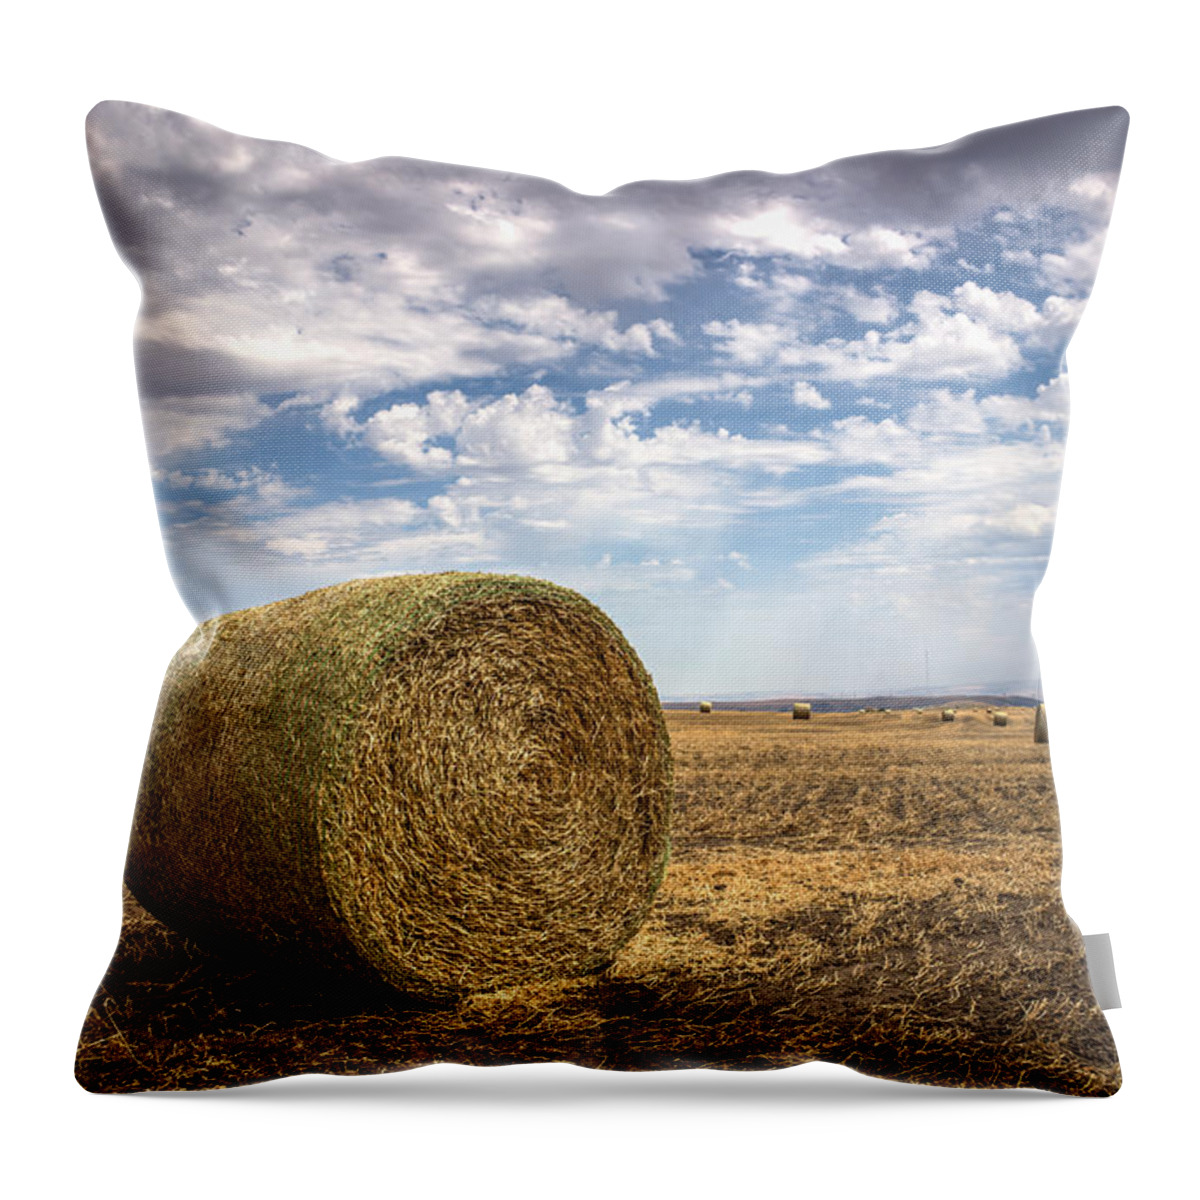 Lewiston Idaho Id Clarkston Washington Wa Lc-valley Lc Valley Pacific Northwest Lewis Clark Landscape Palouse Hay Haybale Bale Roll Field Blue Sky White Clouds Throw Pillow featuring the photograph Idaho Hay Bale by Brad Stinson